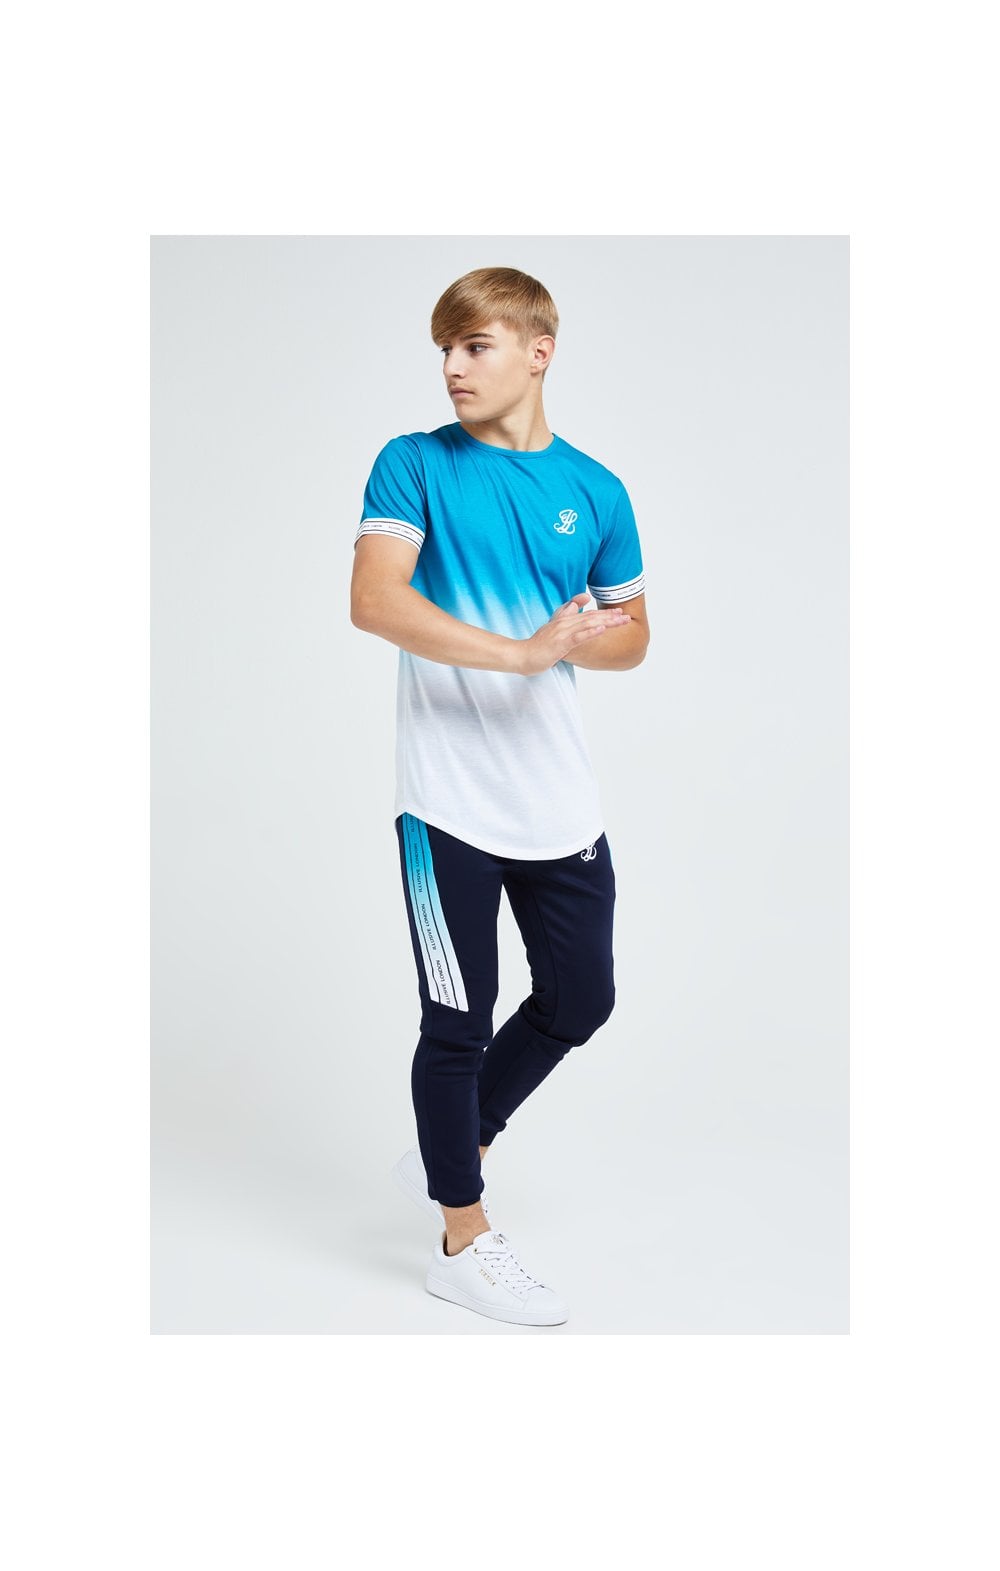 Illusive London Flux Taped Joggers - Navy & Blue (4)